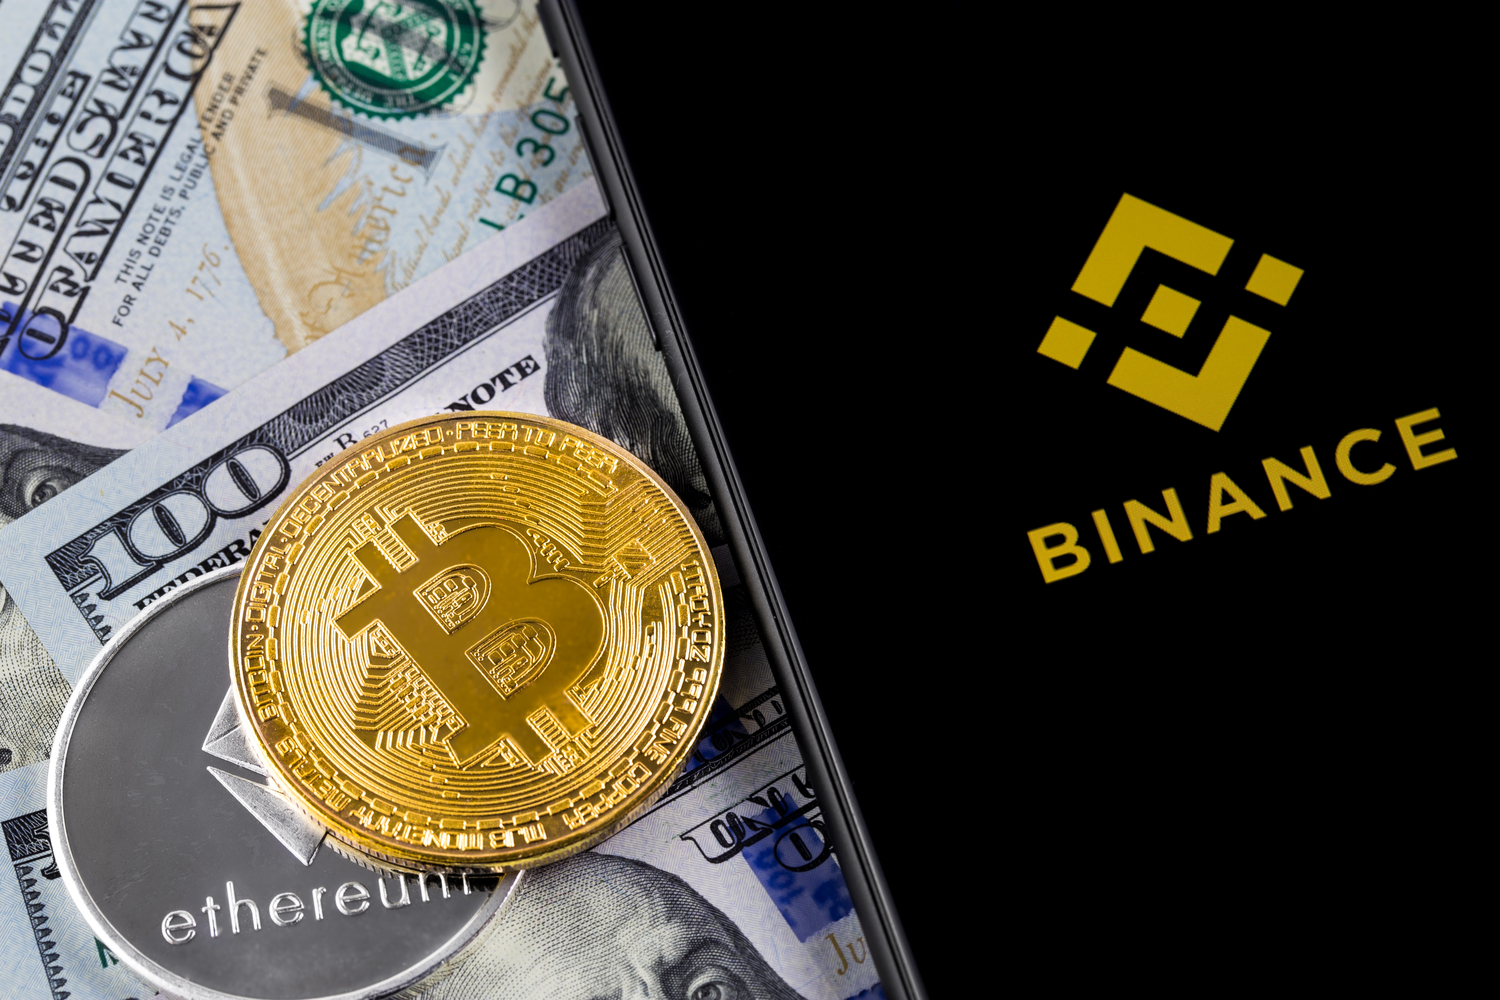 Binance’s BNB Token Hits All-Time High in Bitcoin Value